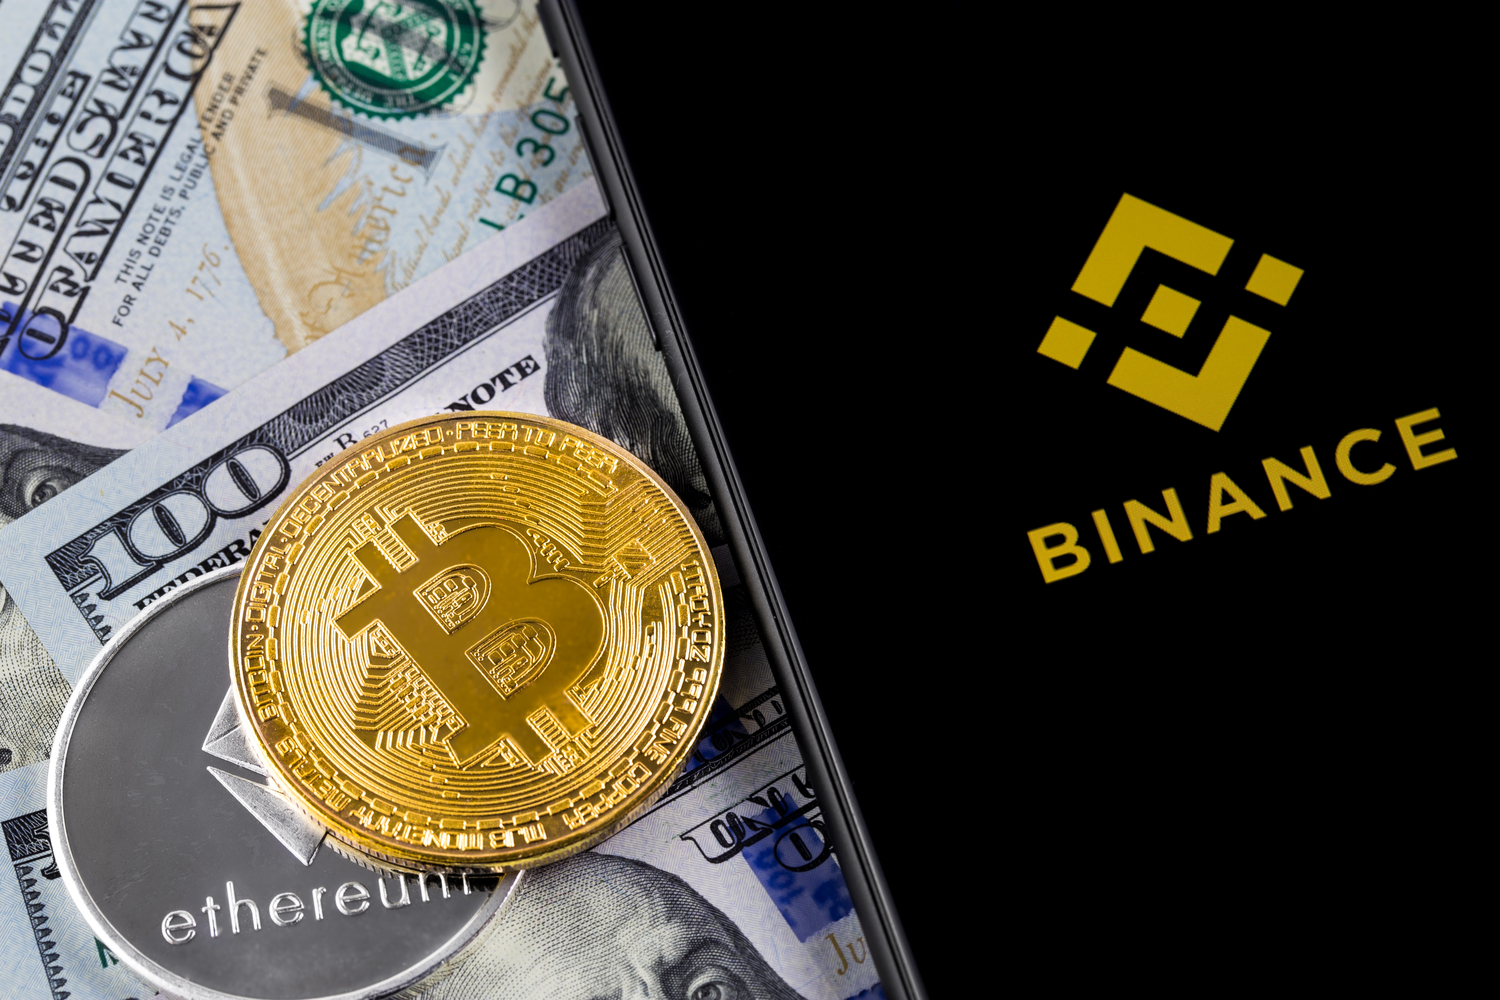 Binance’s BNB Token Hits All-Time High in Bitcoin Value